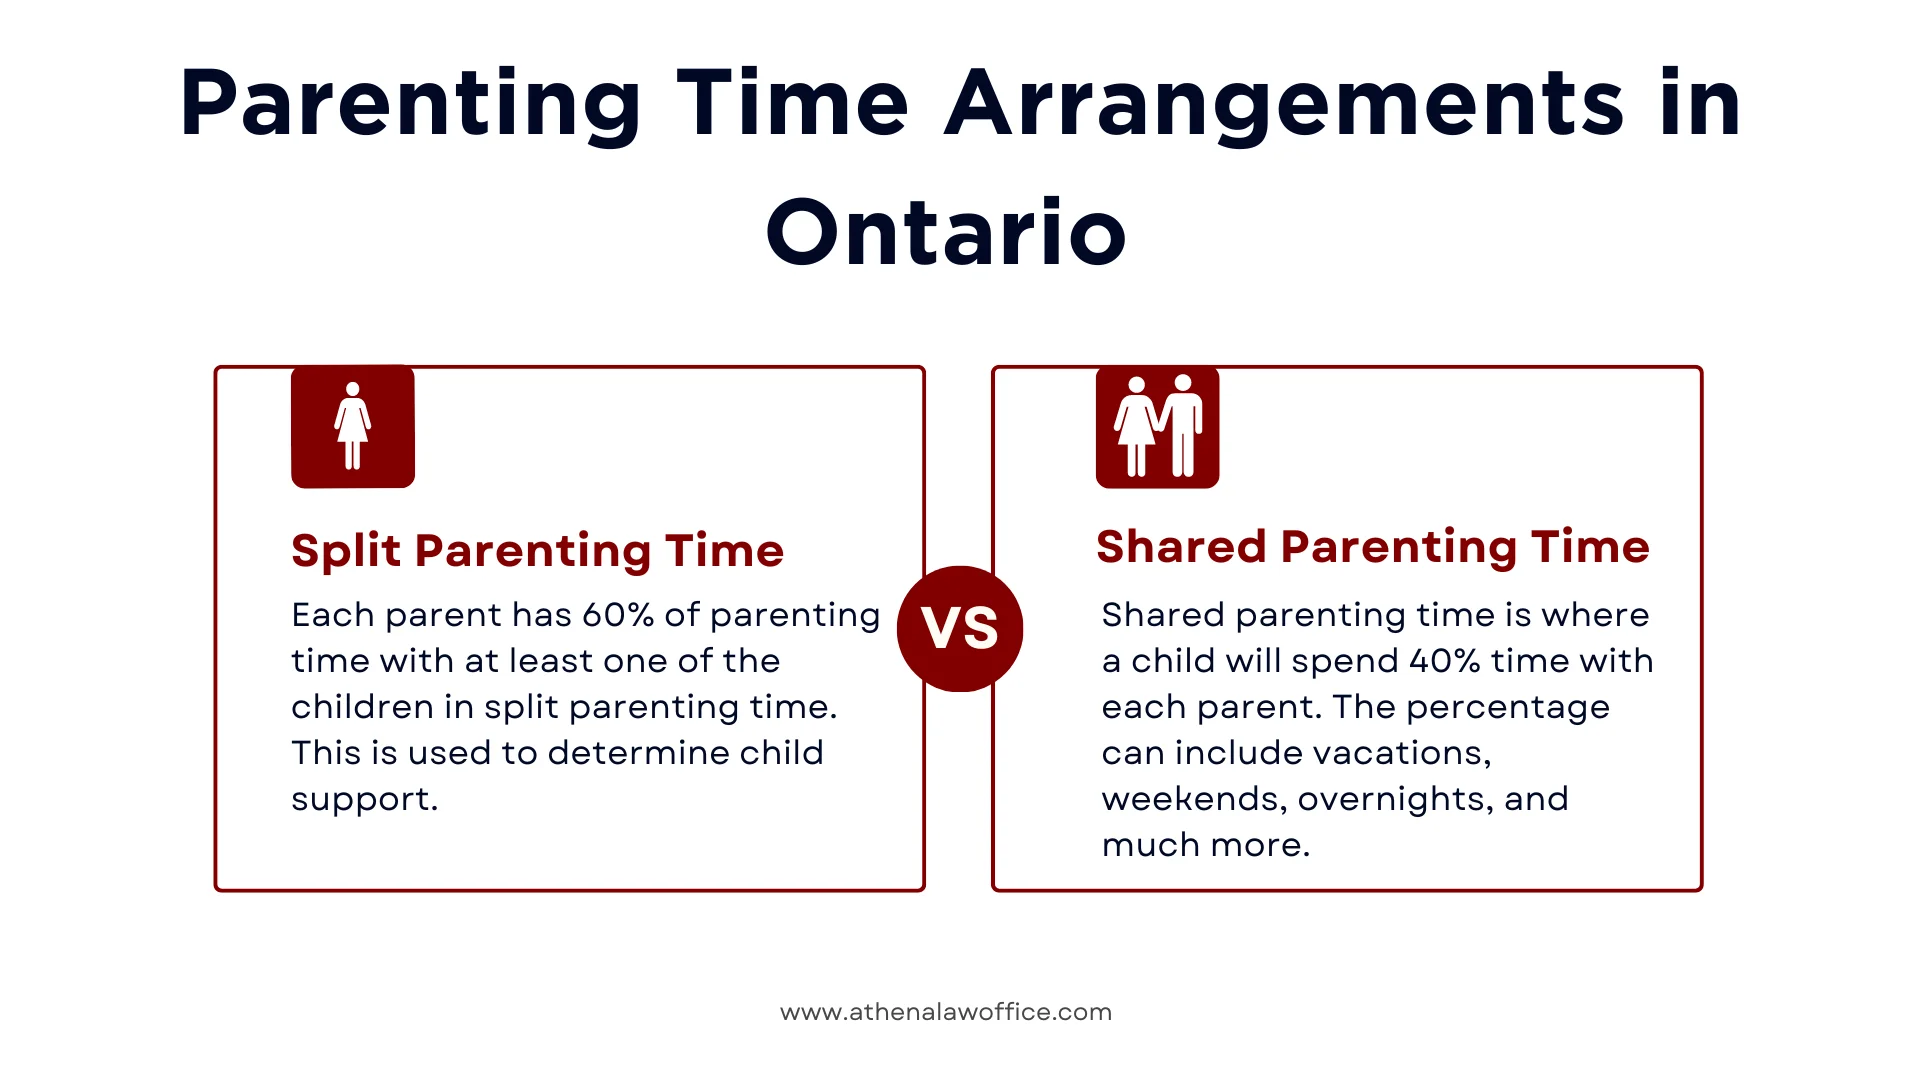 A comparison table of the parenting time arrangements in Ontario